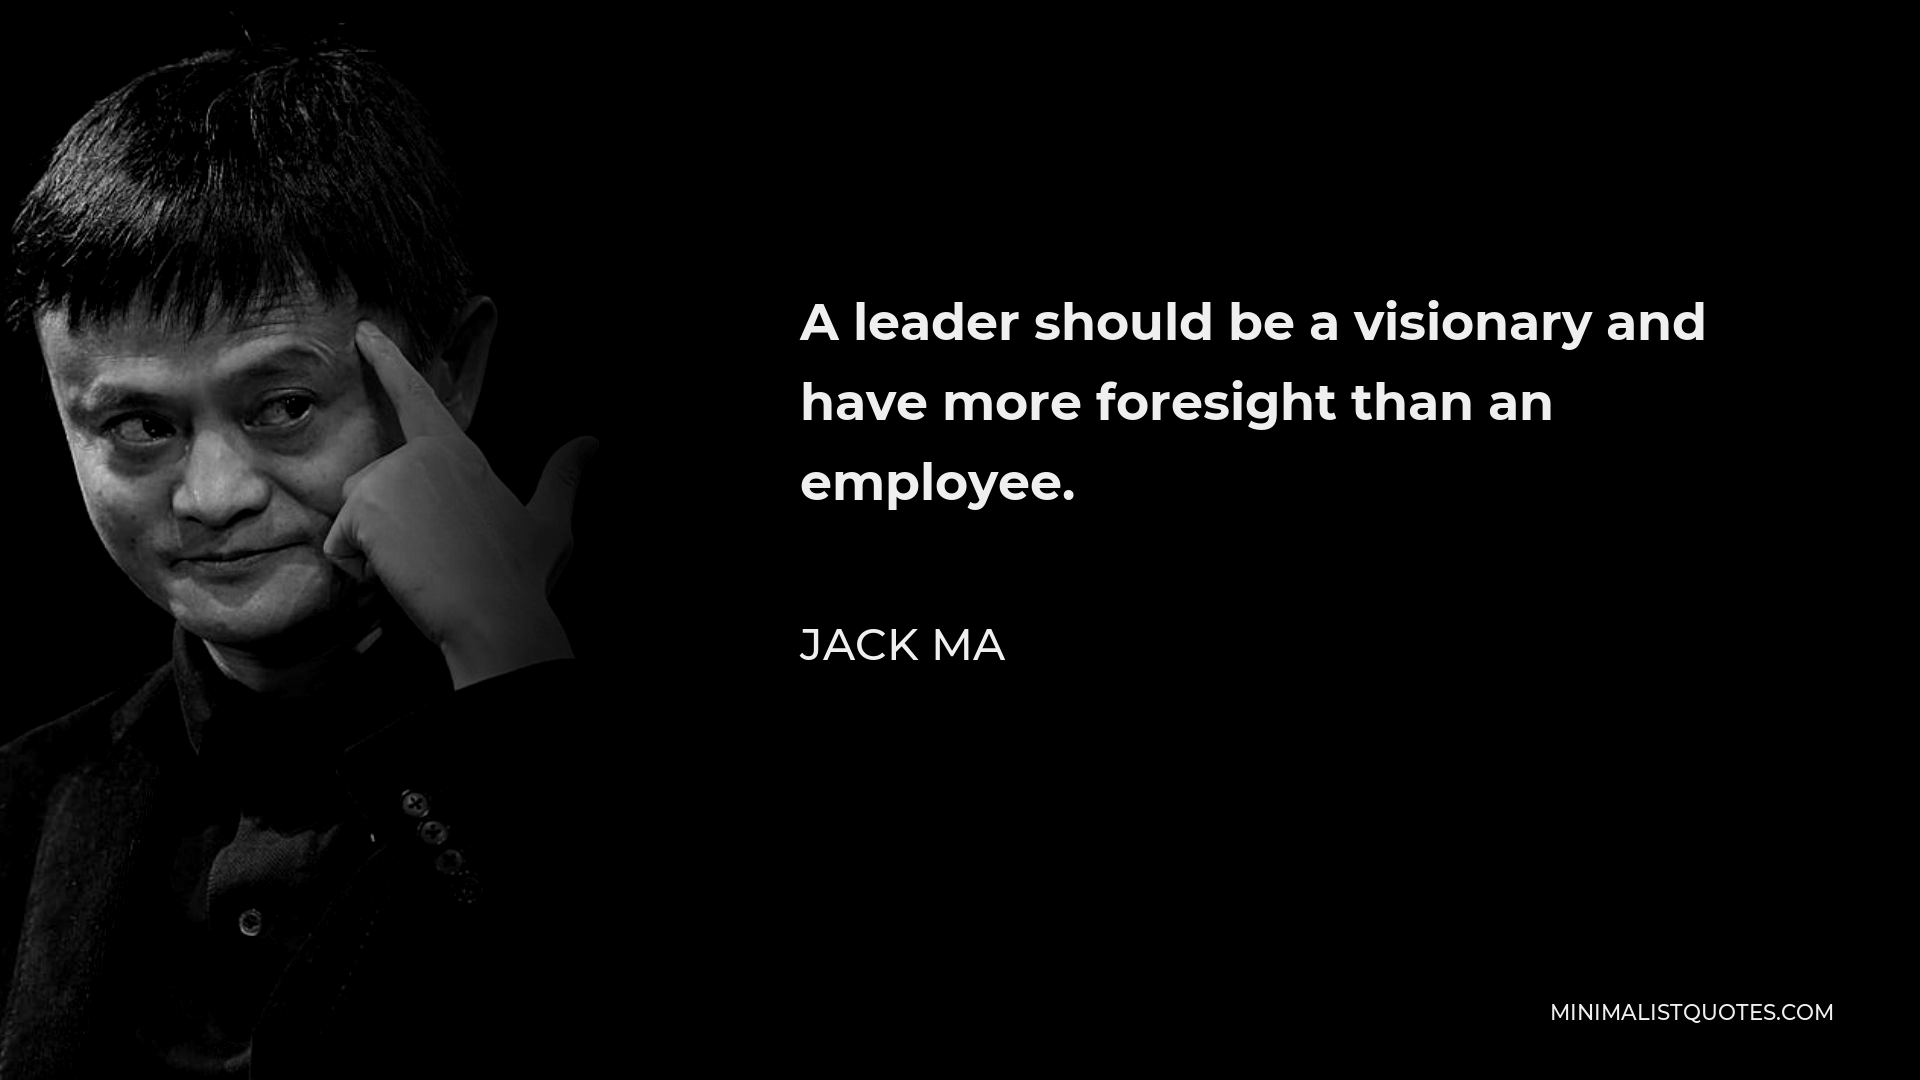 Jack Ma Quote - A leader should be a visionary and have more foresight than an employee.